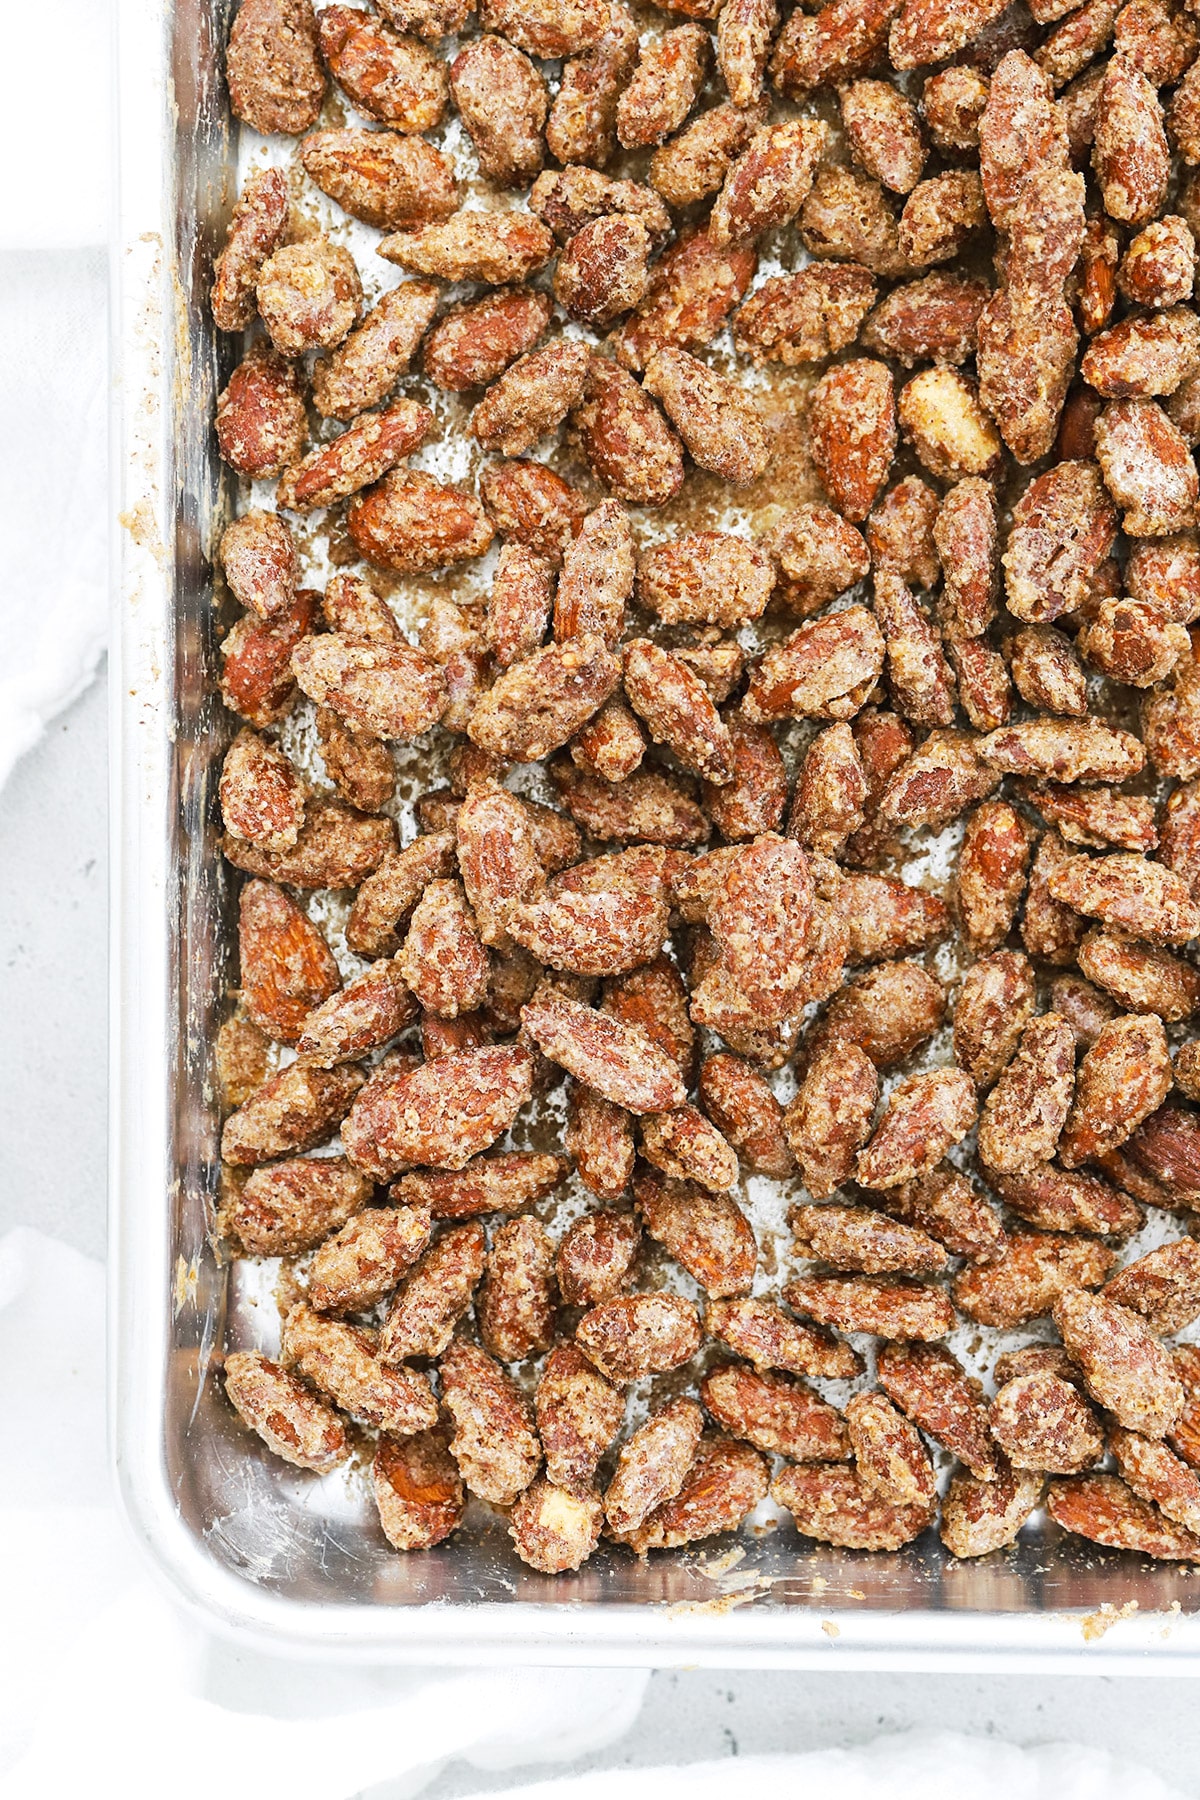 Overhead view of finished roasted cinnamon almonds cooling on the baking sheet